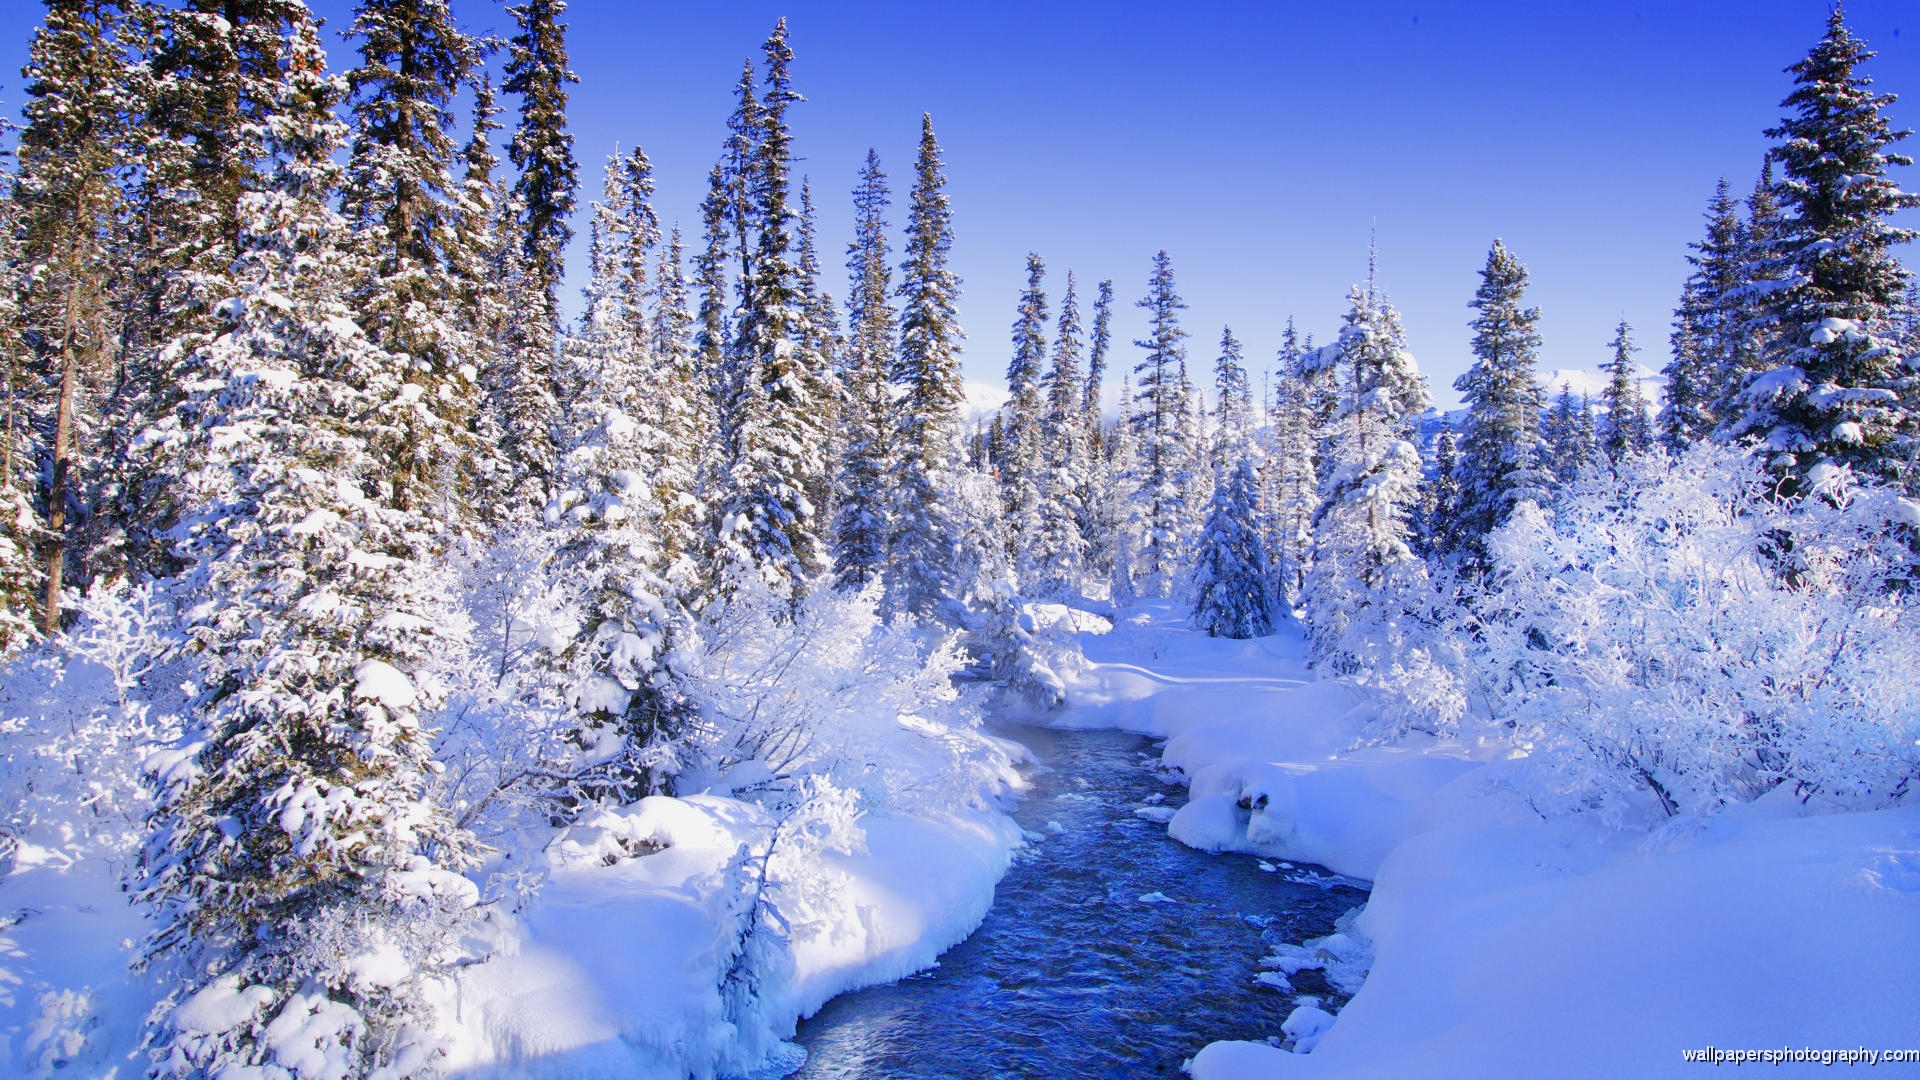  Wallpaper For Android Winter Scenes   HD Nature 1920x1080